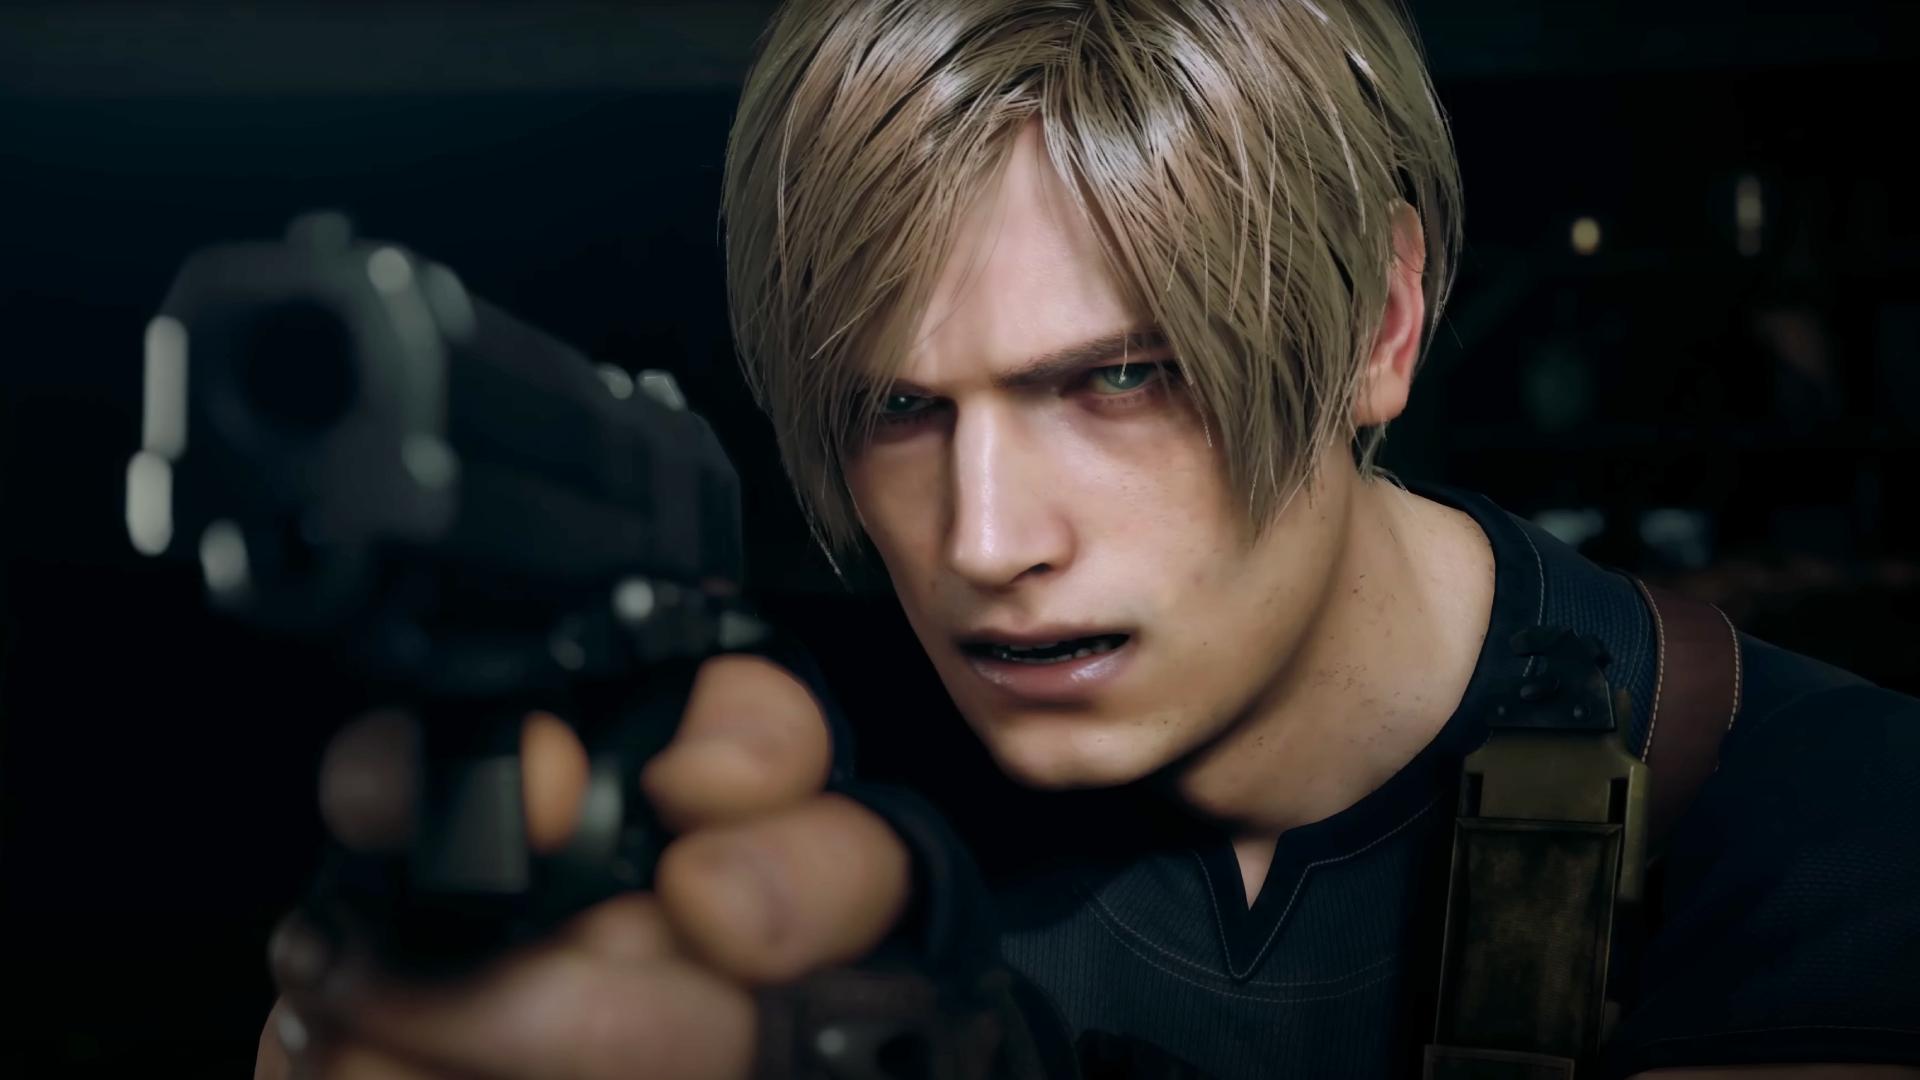 Resident Evil 4 Remake is out on Steam. Here are the best deals